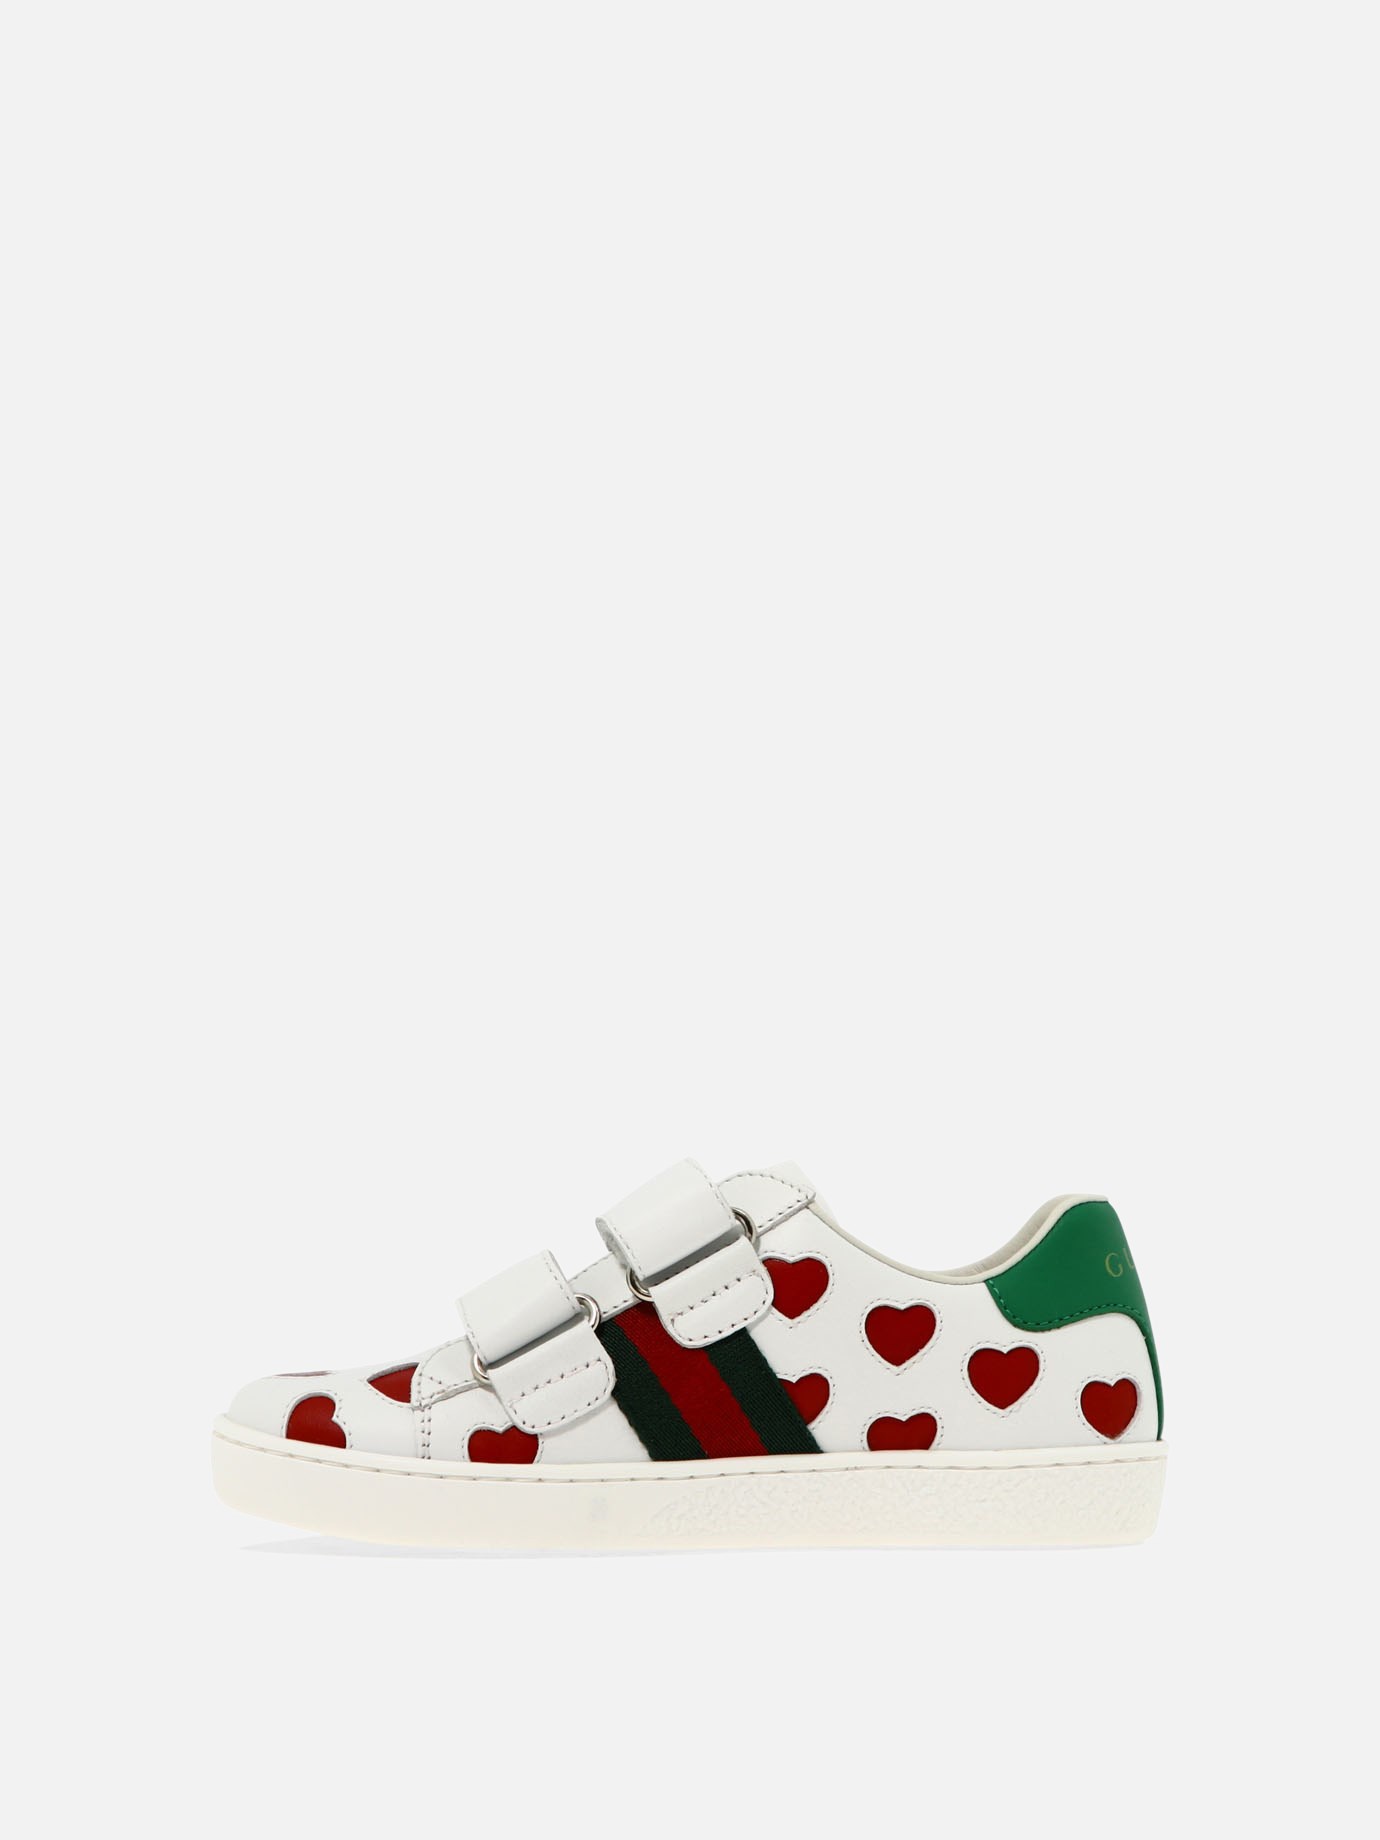  Ace  sneakers by Gucci Kids